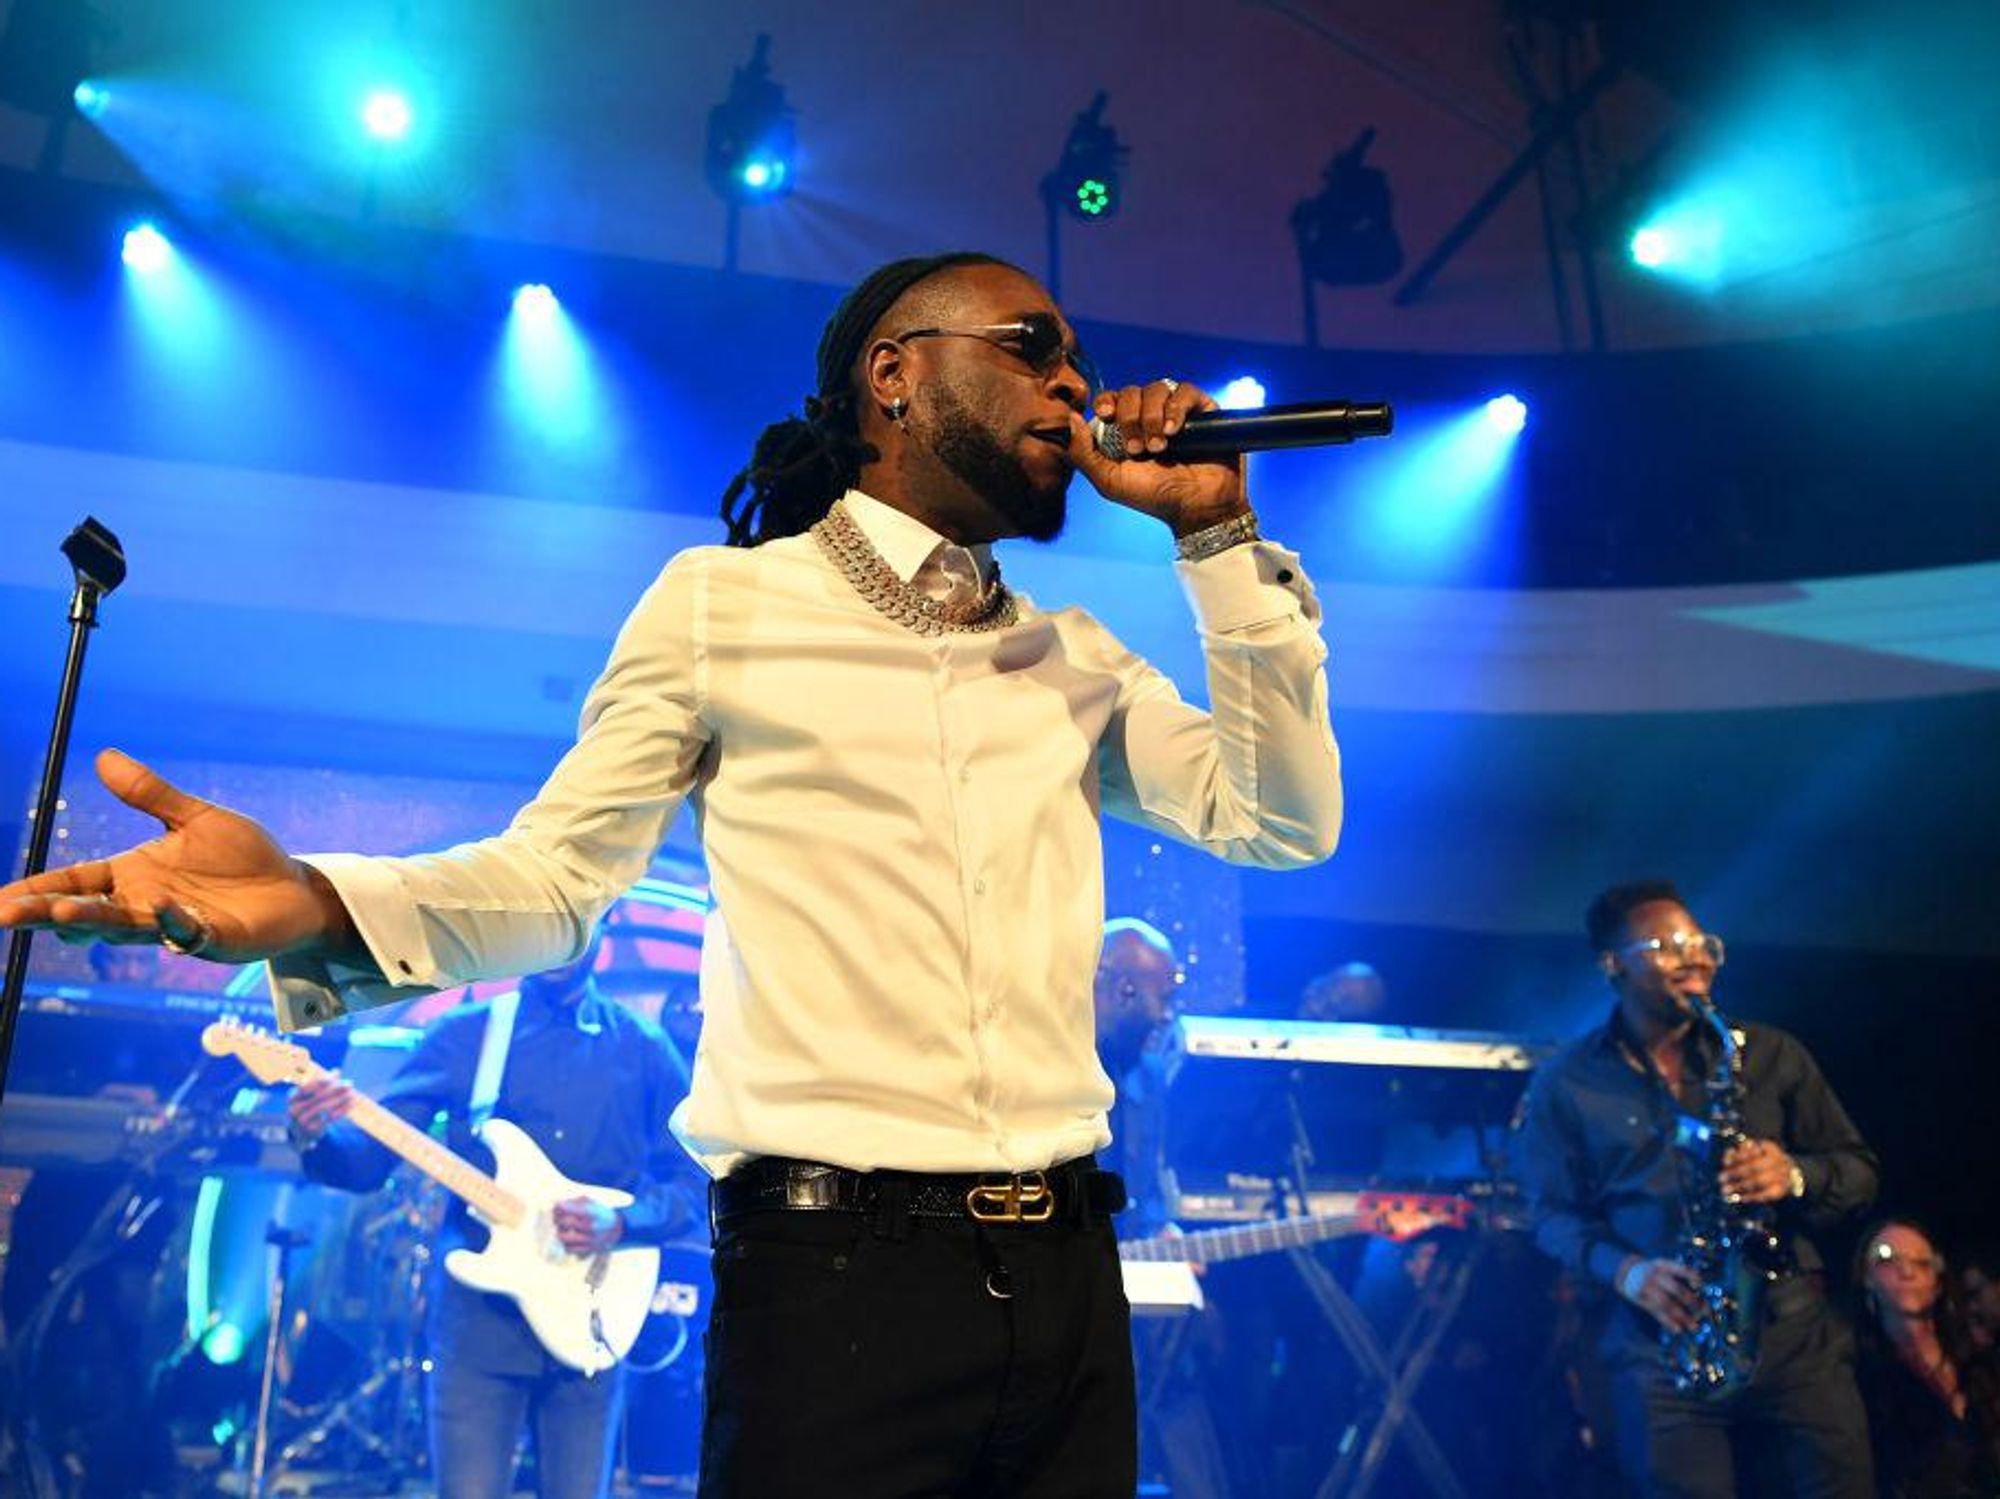 ​Burna Boy performs at the Warner Music Group Pre-Grammy Party on January 23, 2020 in Hollywood, California.